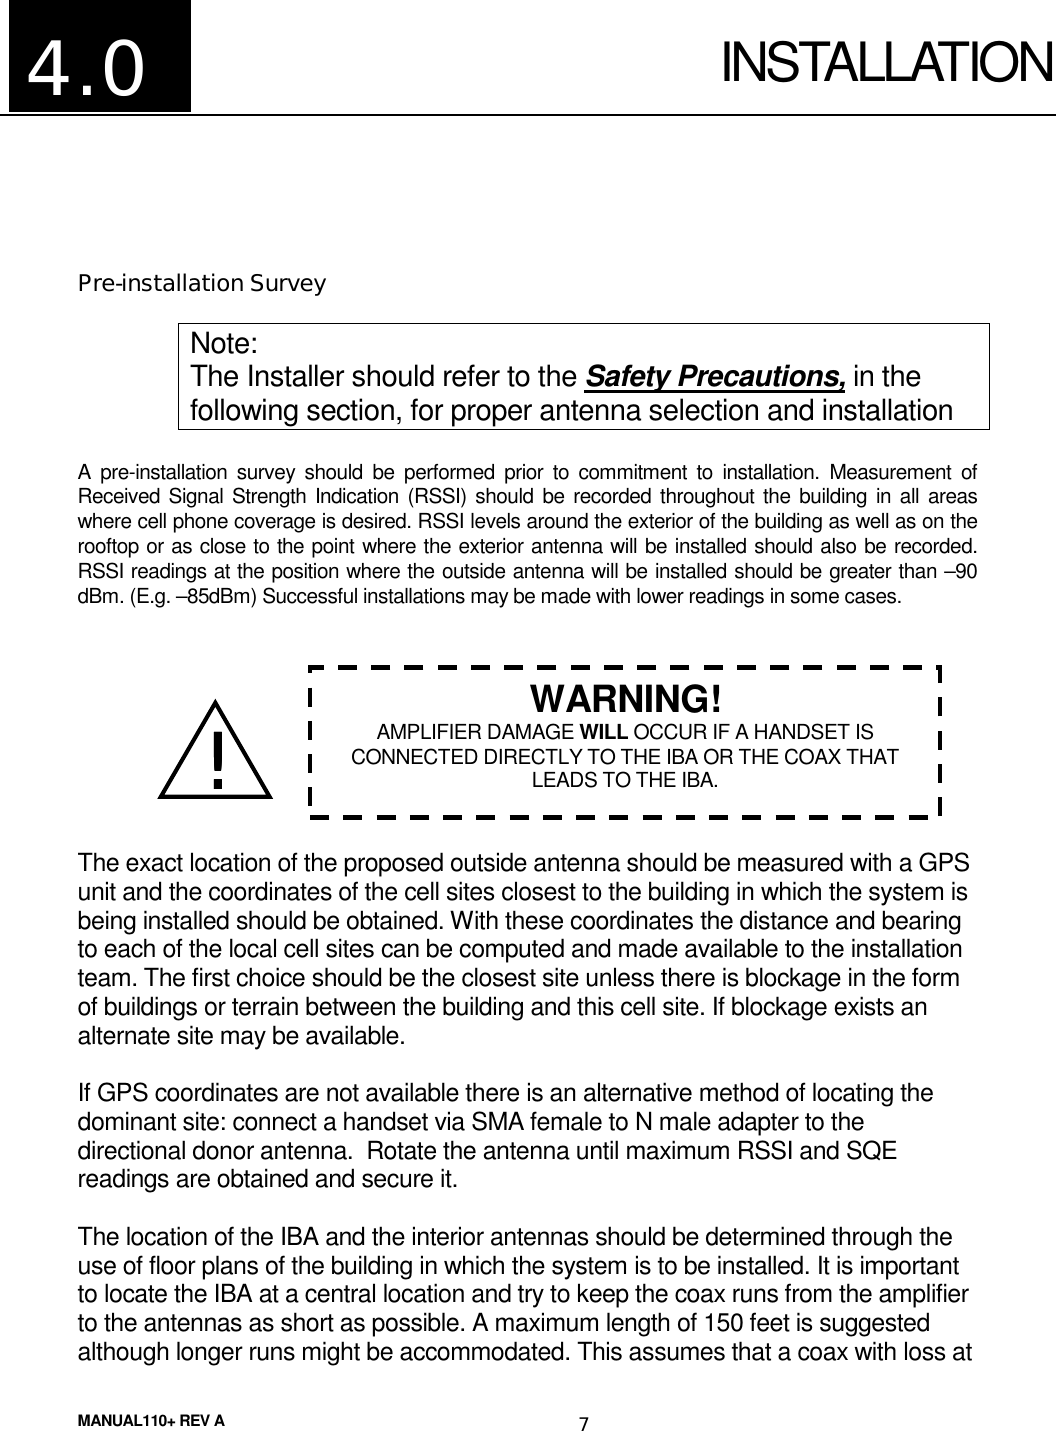 MANUAL110+ REV A 7INSTALLATIONPre-installation SurveyNote:The Installer should refer to the Safety Precautions, in thefollowing section, for proper antenna selection and installationA pre-installation survey should be performed prior to commitment to installation. Measurement ofReceived Signal Strength Indication (RSSI) should be recorded throughout the building in all areaswhere cell phone coverage is desired. RSSI levels around the exterior of the building as well as on therooftop or as close to the point where the exterior antenna will be installed should also be recorded.RSSI readings at the position where the outside antenna will be installed should be greater than –90dBm. (E.g. –85dBm) Successful installations may be made with lower readings in some cases.The exact location of the proposed outside antenna should be measured with a GPSunit and the coordinates of the cell sites closest to the building in which the system isbeing installed should be obtained. With these coordinates the distance and bearingto each of the local cell sites can be computed and made available to the installationteam. The first choice should be the closest site unless there is blockage in the formof buildings or terrain between the building and this cell site. If blockage exists analternate site may be available.If GPS coordinates are not available there is an alternative method of locating thedominant site: connect a handset via SMA female to N male adapter to thedirectional donor antenna.  Rotate the antenna until maximum RSSI and SQEreadings are obtained and secure it.The location of the IBA and the interior antennas should be determined through theuse of floor plans of the building in which the system is to be installed. It is importantto locate the IBA at a central location and try to keep the coax runs from the amplifierto the antennas as short as possible. A maximum length of 150 feet is suggestedalthough longer runs might be accommodated. This assumes that a coax with loss at4.0!!!!WARNING!AMPLIFIER DAMAGE WILL OCCUR IF A HANDSET ISCONNECTED DIRECTLY TO THE IBA OR THE COAX THATLEADS TO THE IBA.